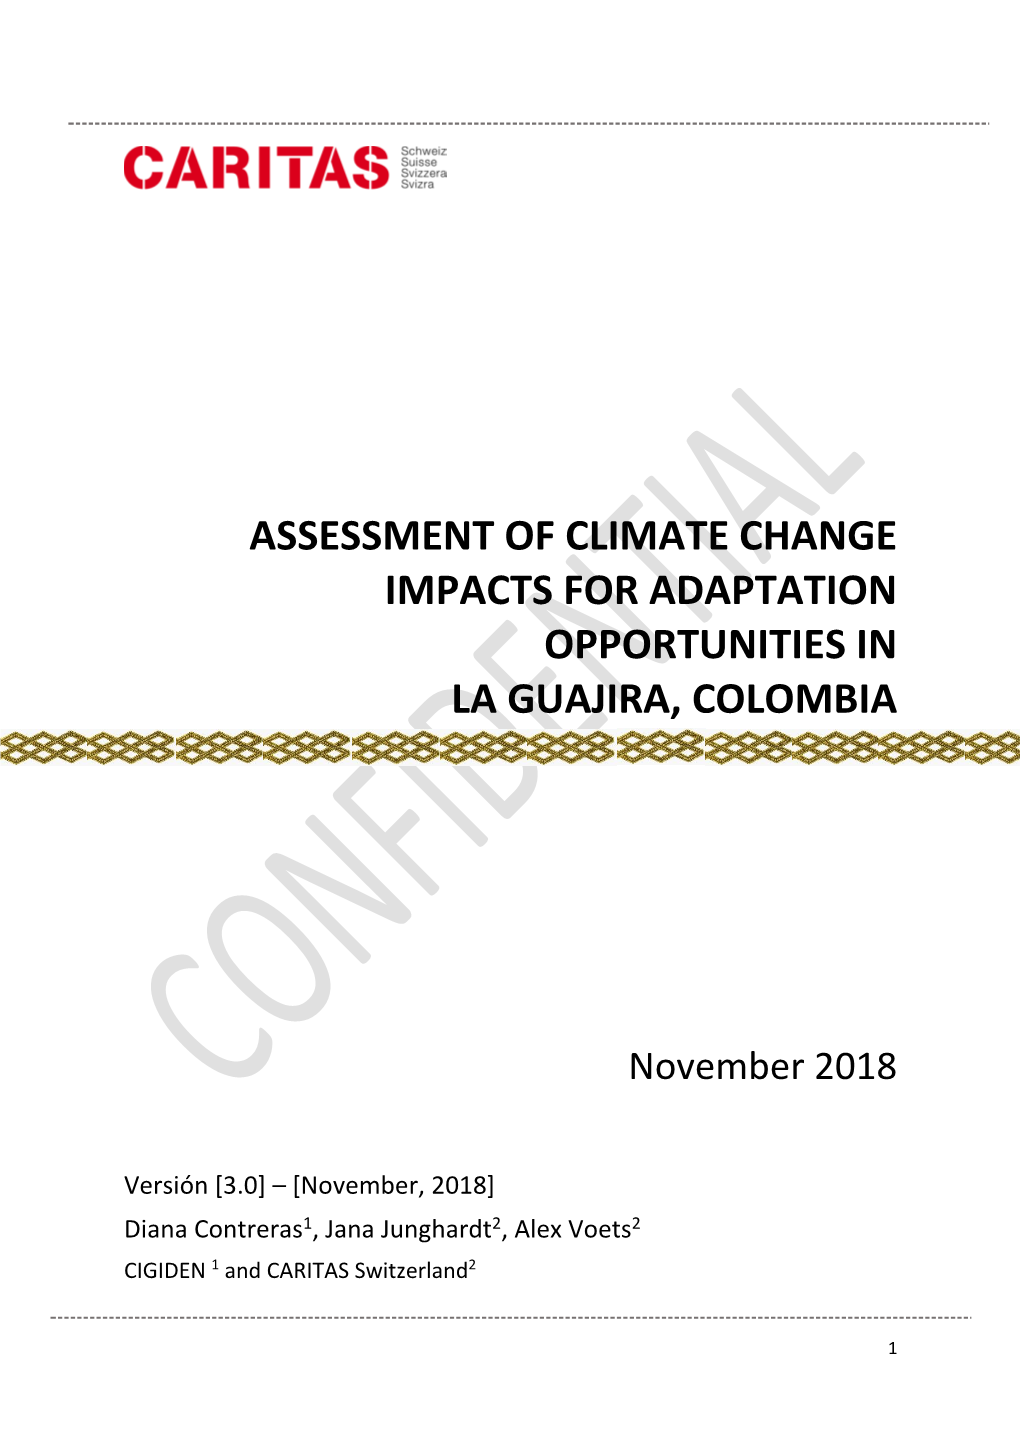 Assessment of Climate Change Impacts for Adaptation Opportunities in La Guajira, Colombia